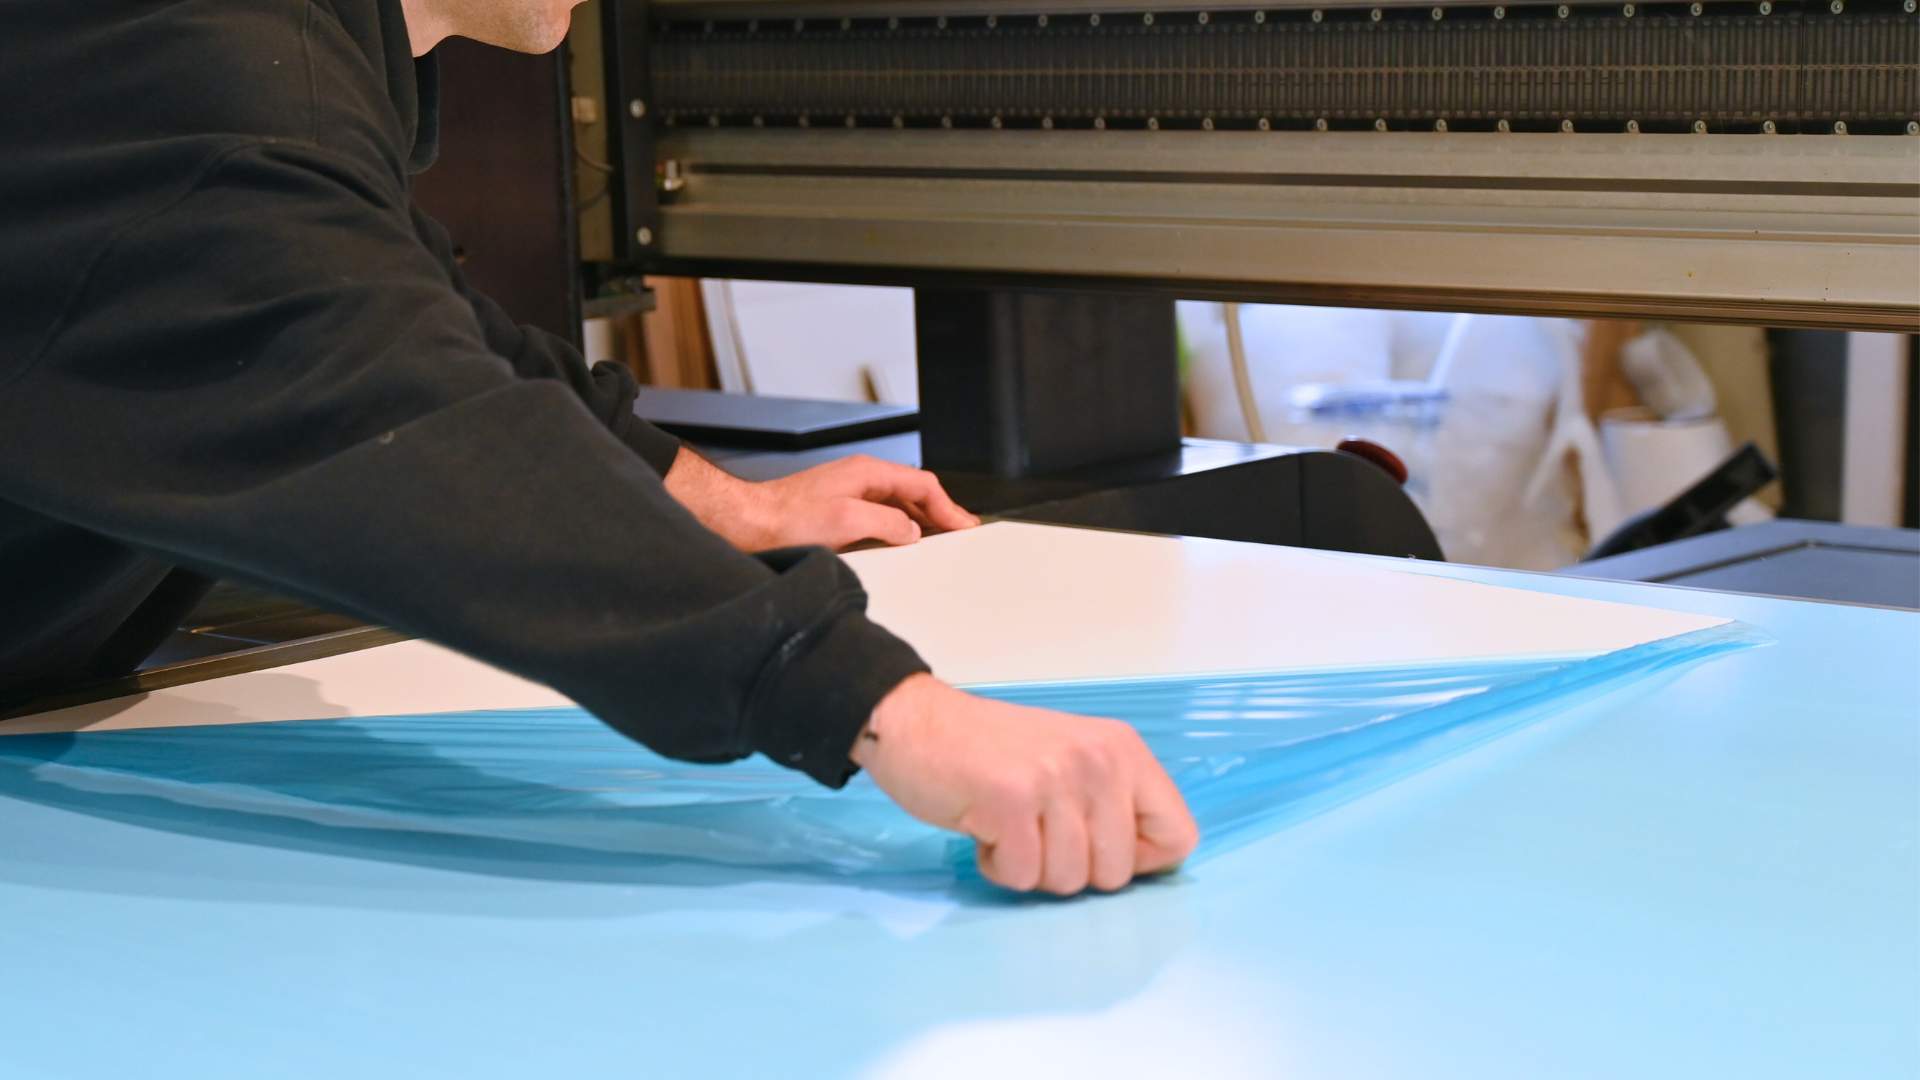 Printing on J-point boards